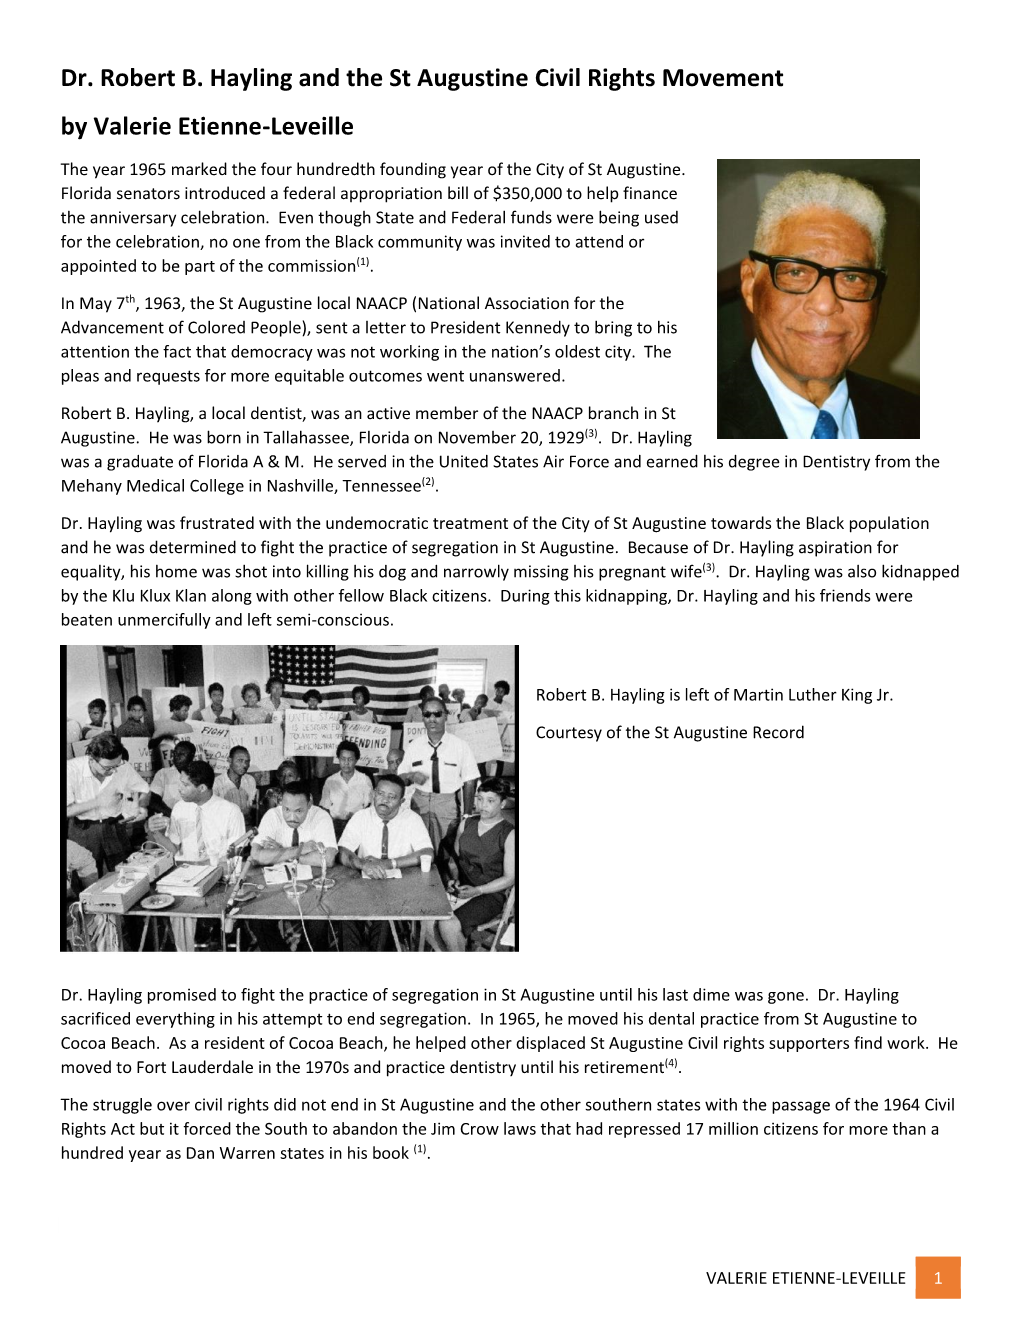 Dr. Robert Hayling and the Civil Rights Movement